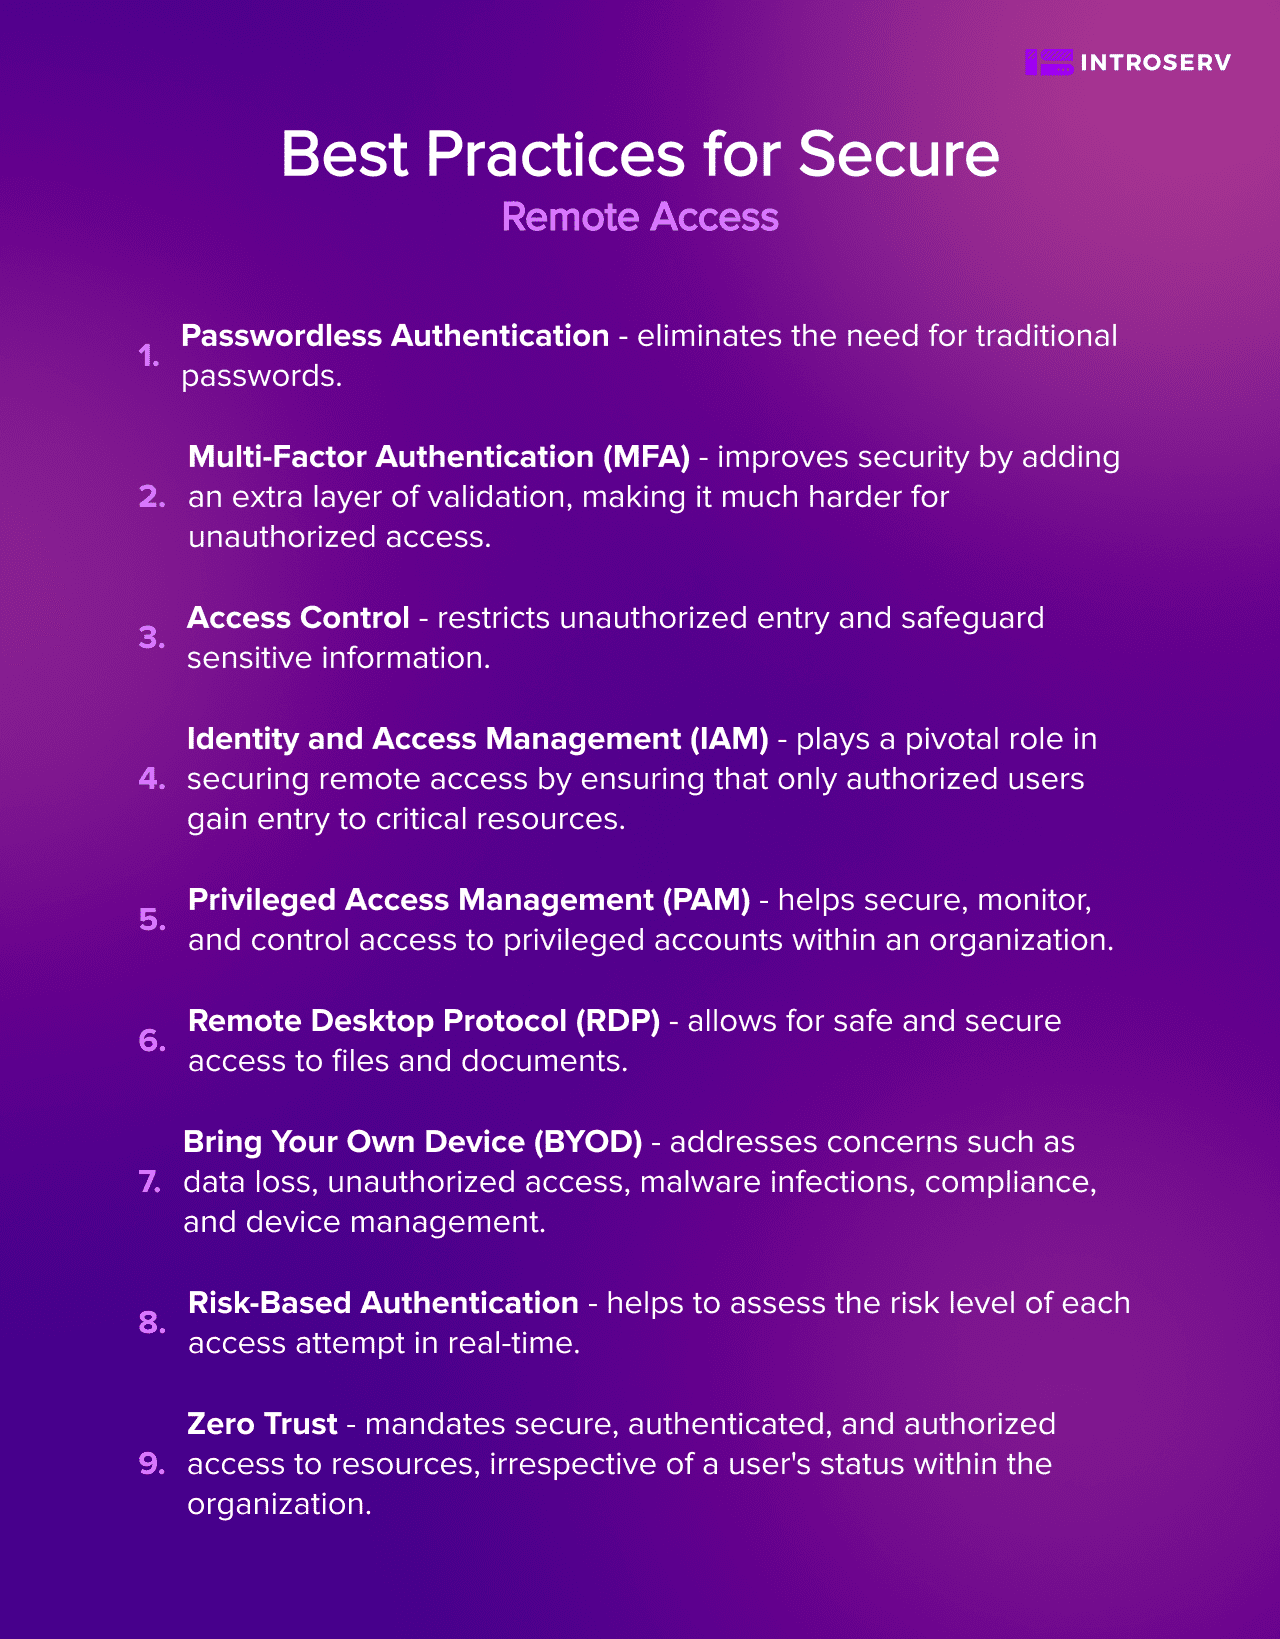 Best Practices for Secure Remote Access